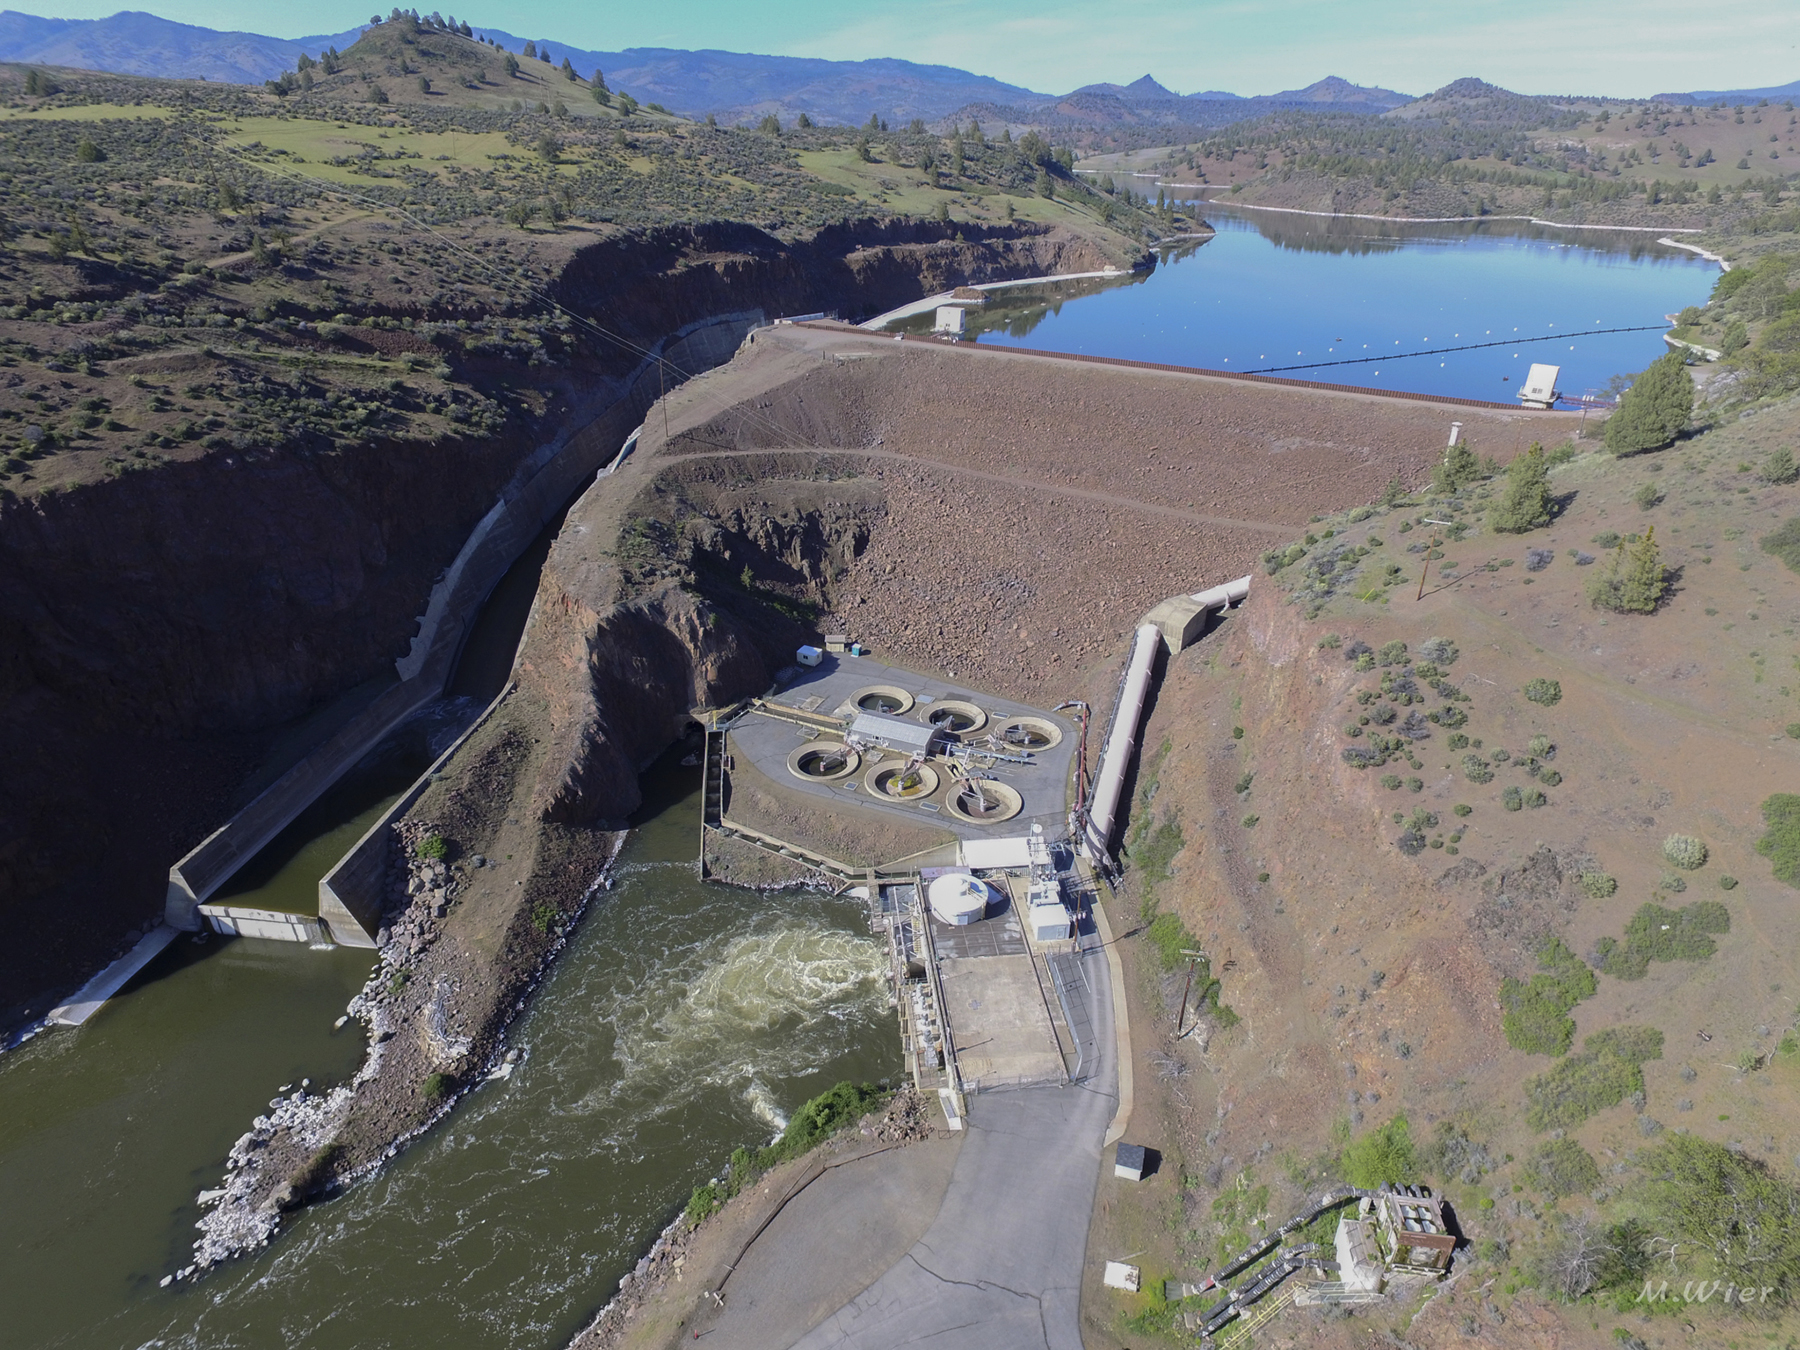 At the Iron Gate Dam in California, an existing low-level tunnel will be strengthened to ensure that it can withstand the hydraulic forces associated with the reservoir drawdown. (Image courtesy of Michael Wier/California Trout)